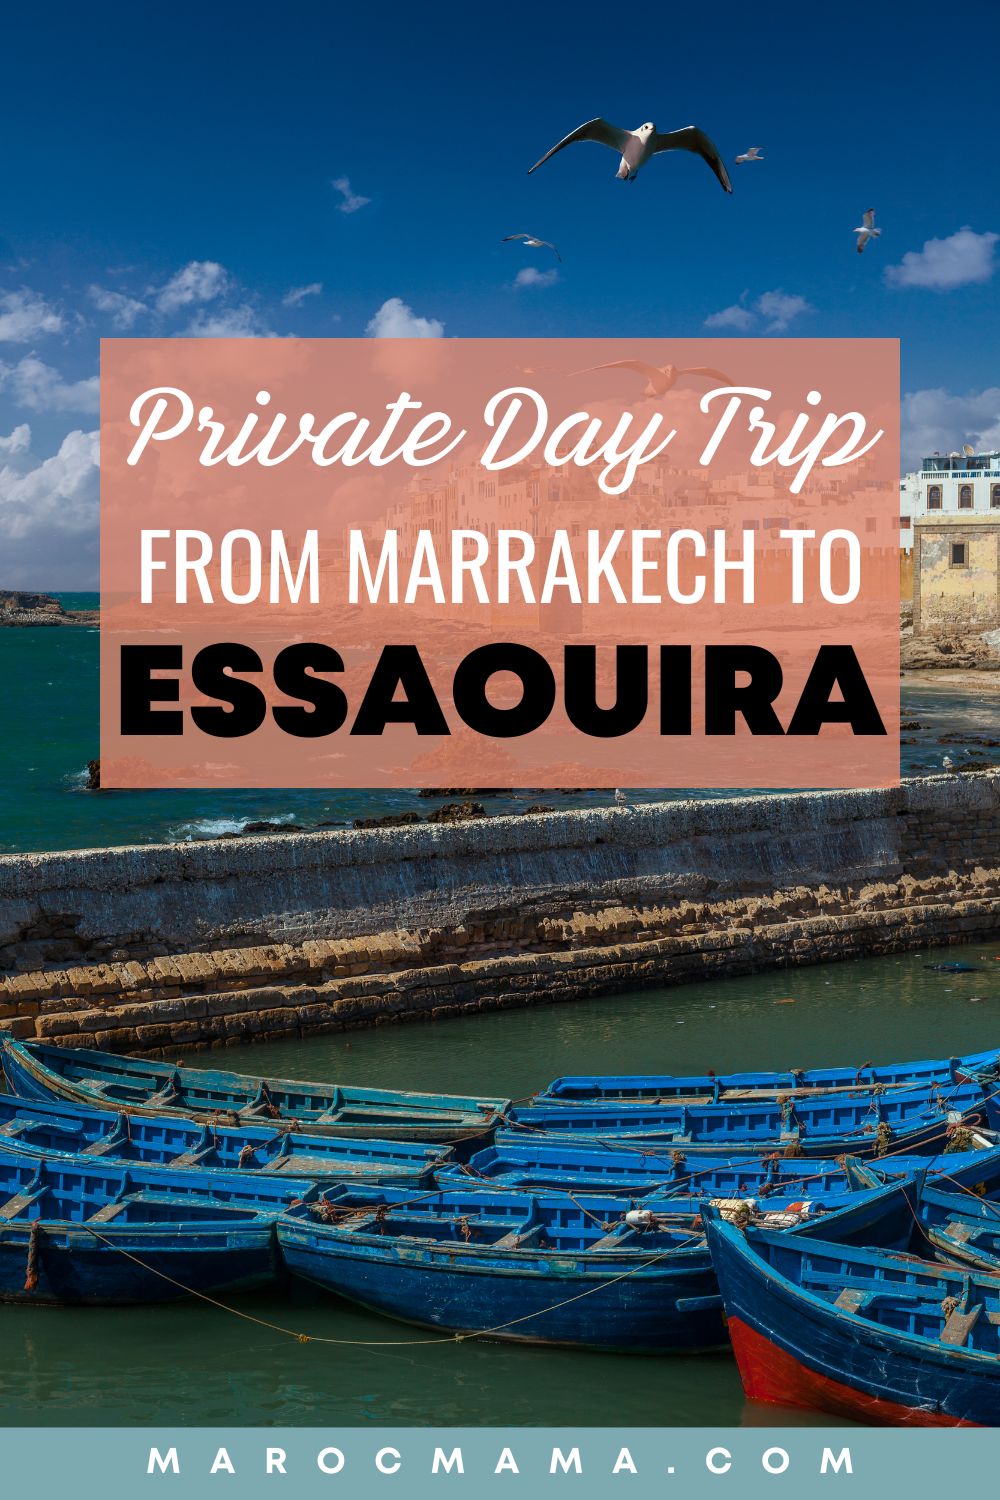 Coastal town of Essaouira, Morocco with the text Private Day Trip from Marrakech to Essaouira